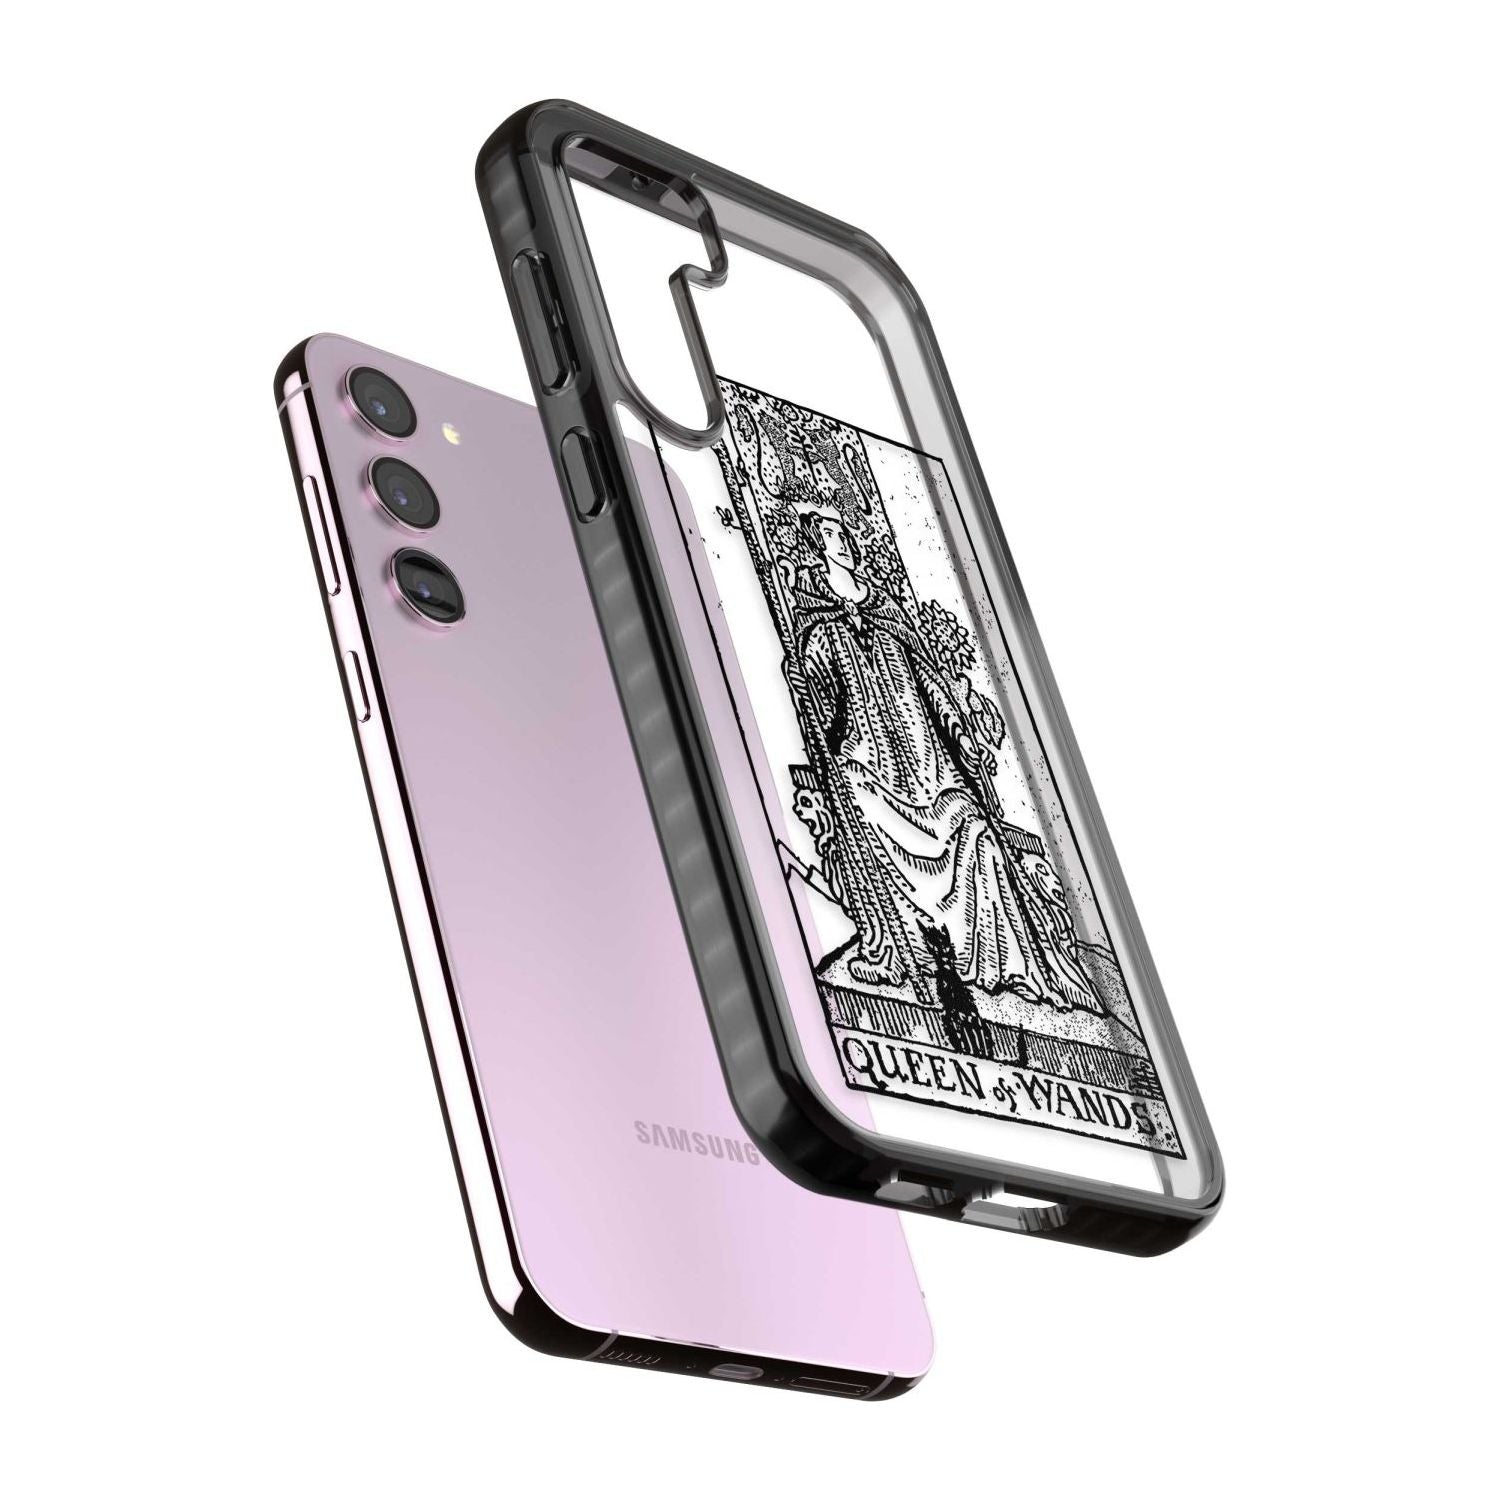 Personalised Queen of Wands Tarot Card - Transparent Custom Phone Case iPhone 15 Pro Max / Black Impact Case,iPhone 15 Plus / Black Impact Case,iPhone 15 Pro / Black Impact Case,iPhone 15 / Black Impact Case,iPhone 15 Pro Max / Impact Case,iPhone 15 Plus / Impact Case,iPhone 15 Pro / Impact Case,iPhone 15 / Impact Case,iPhone 15 Pro Max / Magsafe Black Impact Case,iPhone 15 Plus / Magsafe Black Impact Case,iPhone 15 Pro / Magsafe Black Impact Case,iPhone 15 / Magsafe Black Impact Case,iPhone 14 Pro Max / Bl